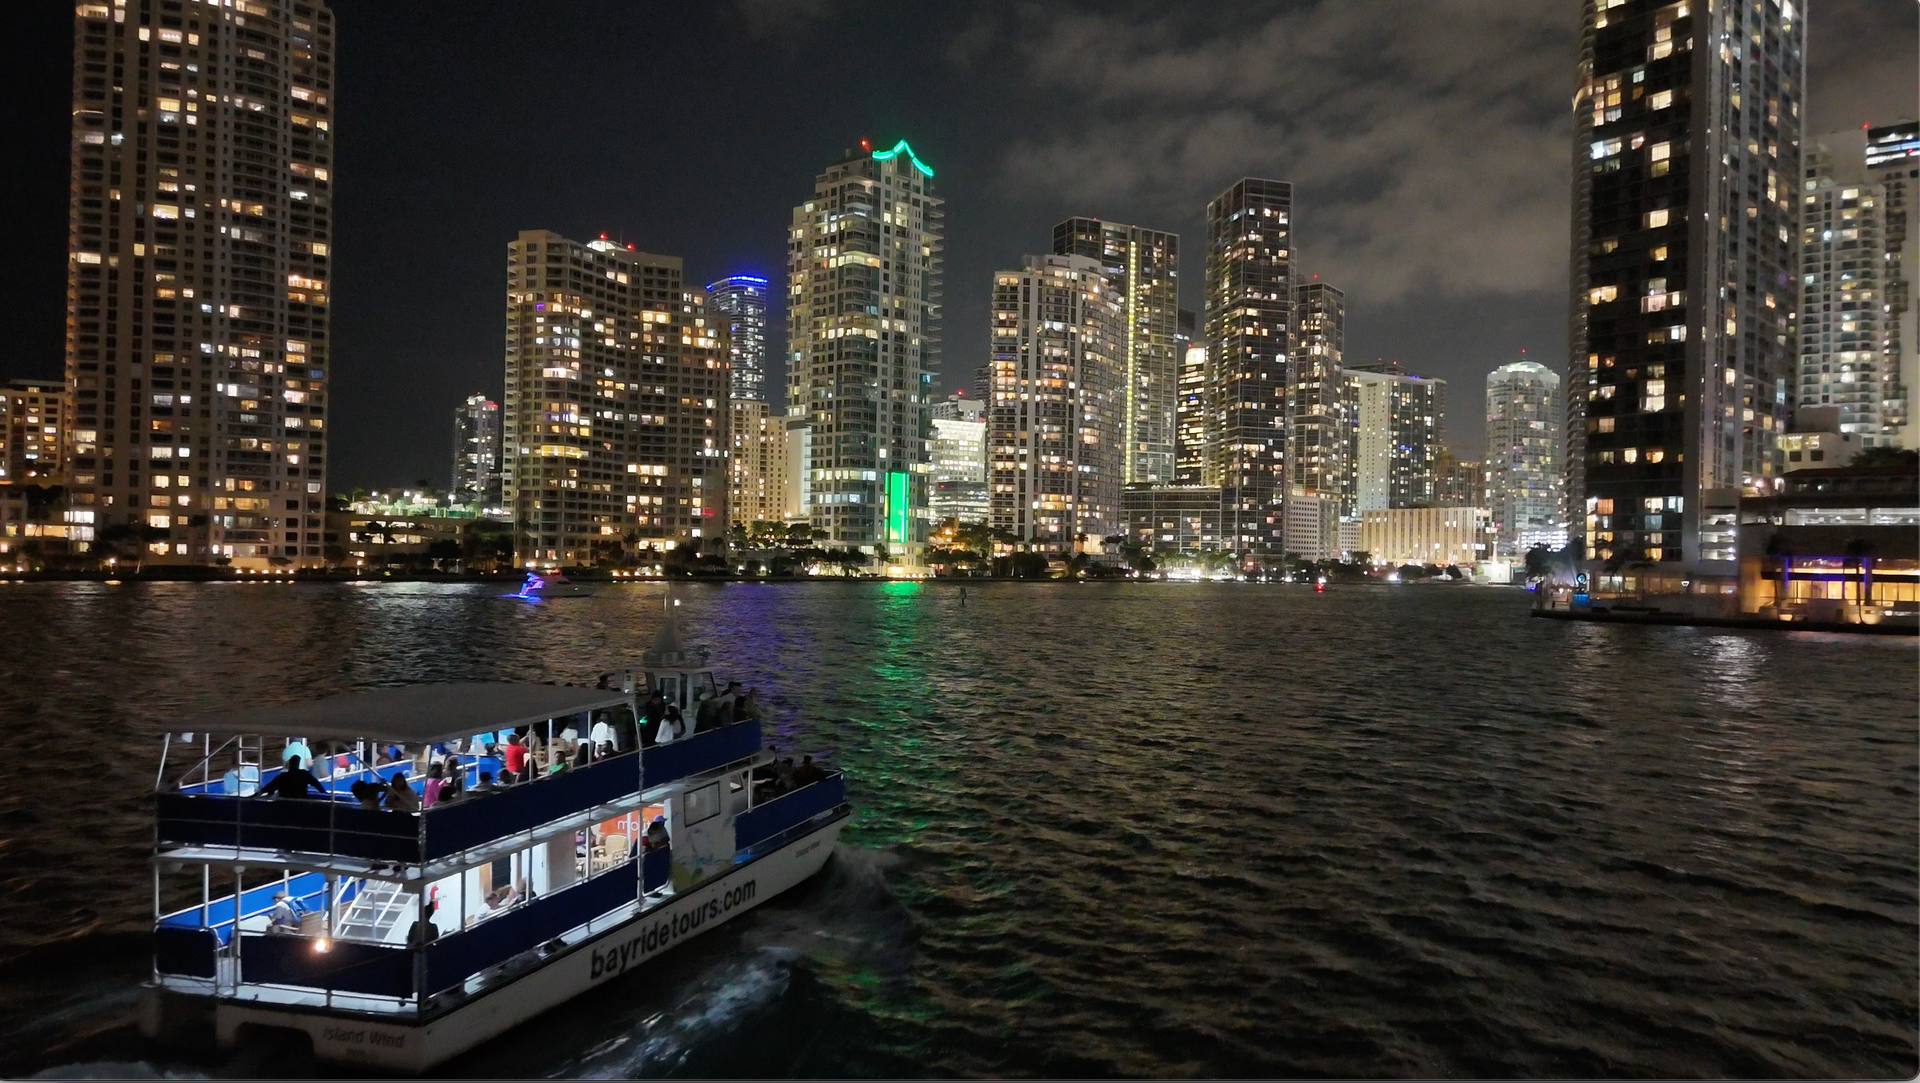 The Miami Night Cruise going into the Miami River, last stop before going back to Bayside Marketplace.